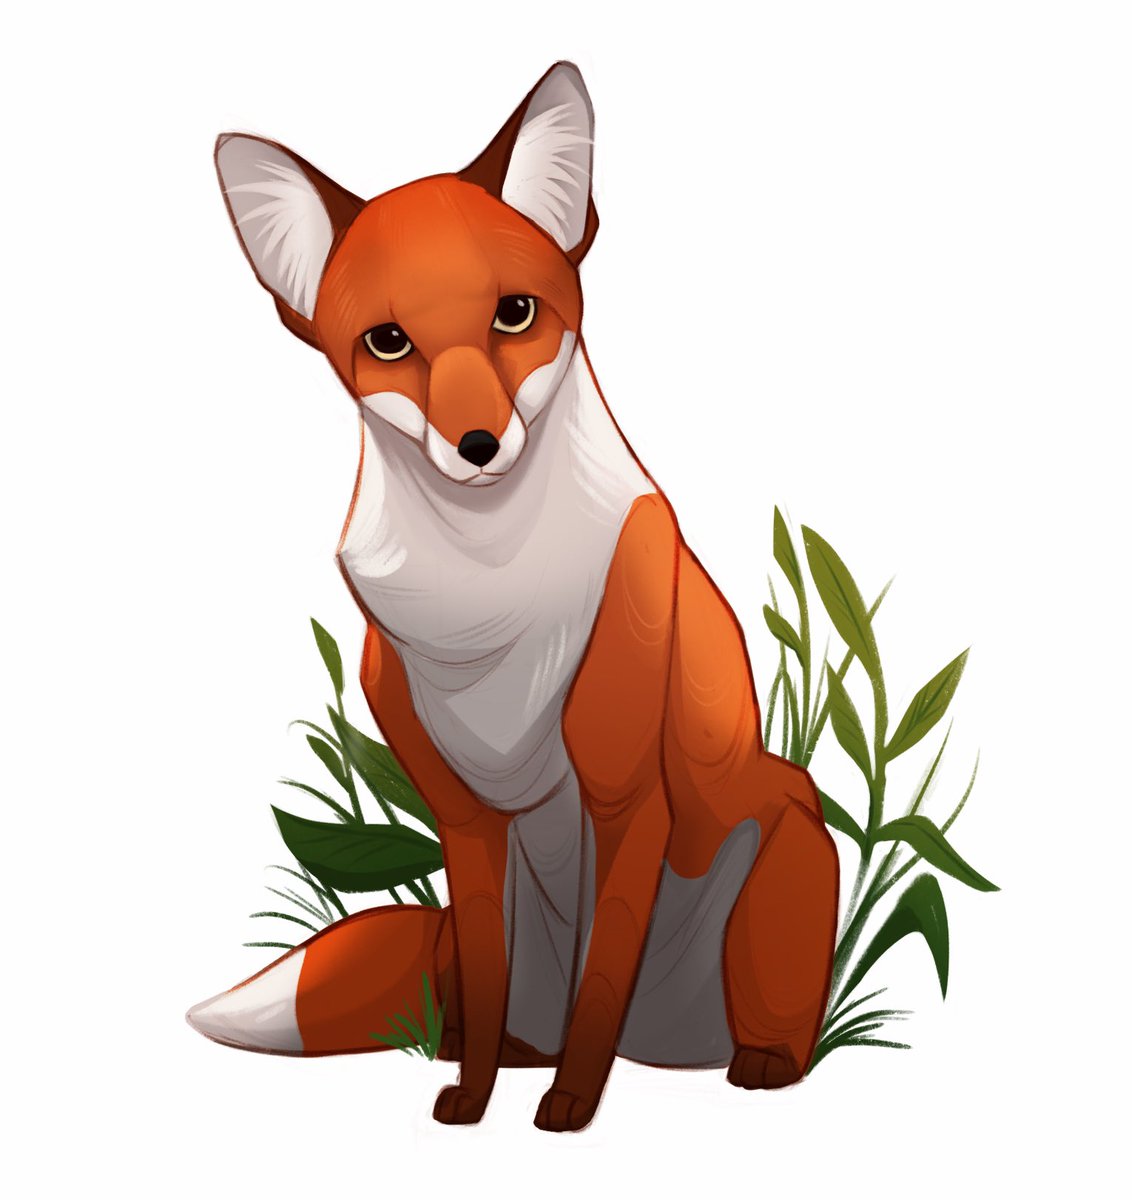 Happy Friday! Let’s see some fox art #foxfriday